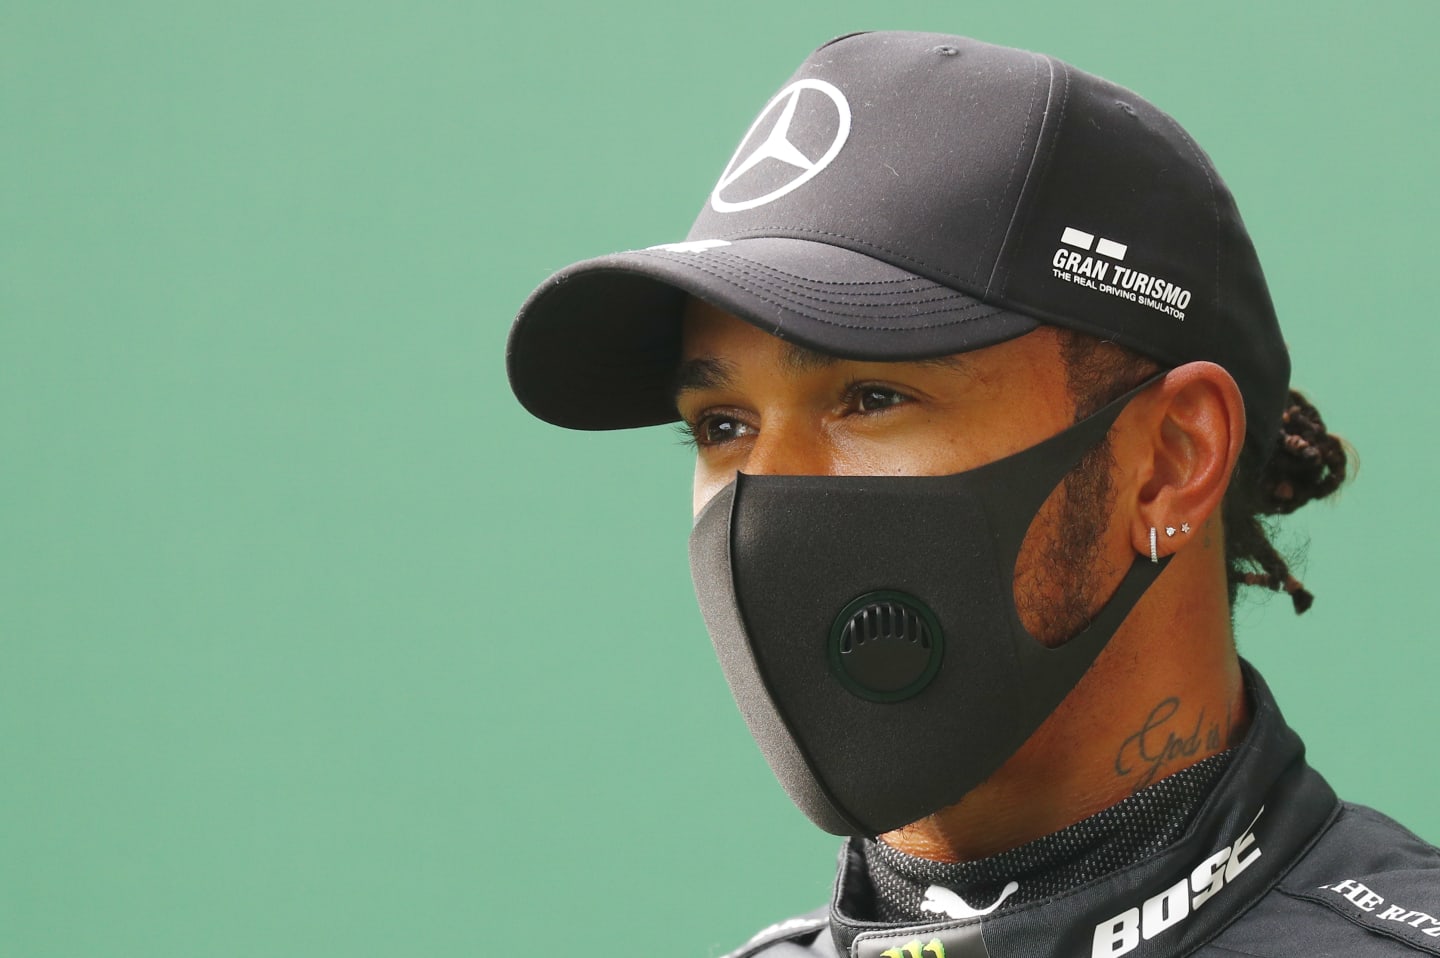 SPA, BELGIUM - AUGUST 29: Pole position qualifier Lewis Hamilton of Great Britain and Mercedes GP looks on in parc ferme during qualifying for the F1 Grand Prix of Belgium at Circuit de Spa-Francorchamps on August 29, 2020 in Spa, Belgium. (Photo by Francois Lenoir/Pool via Getty Images)